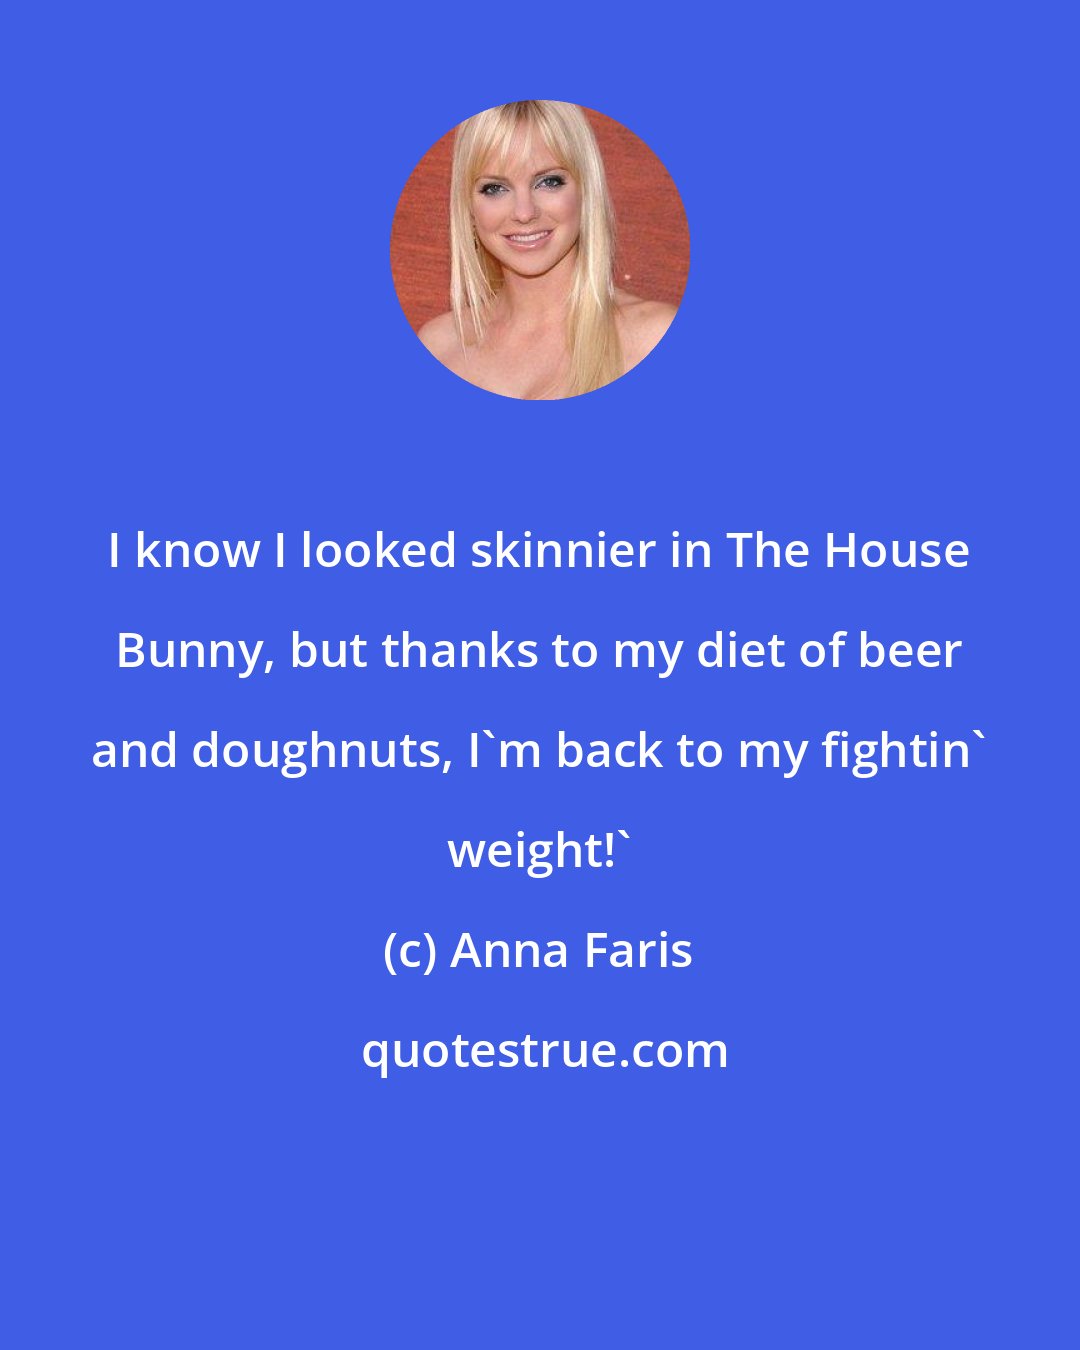 Anna Faris: I know I looked skinnier in The House Bunny, but thanks to my diet of beer and doughnuts, I'm back to my fightin' weight!'